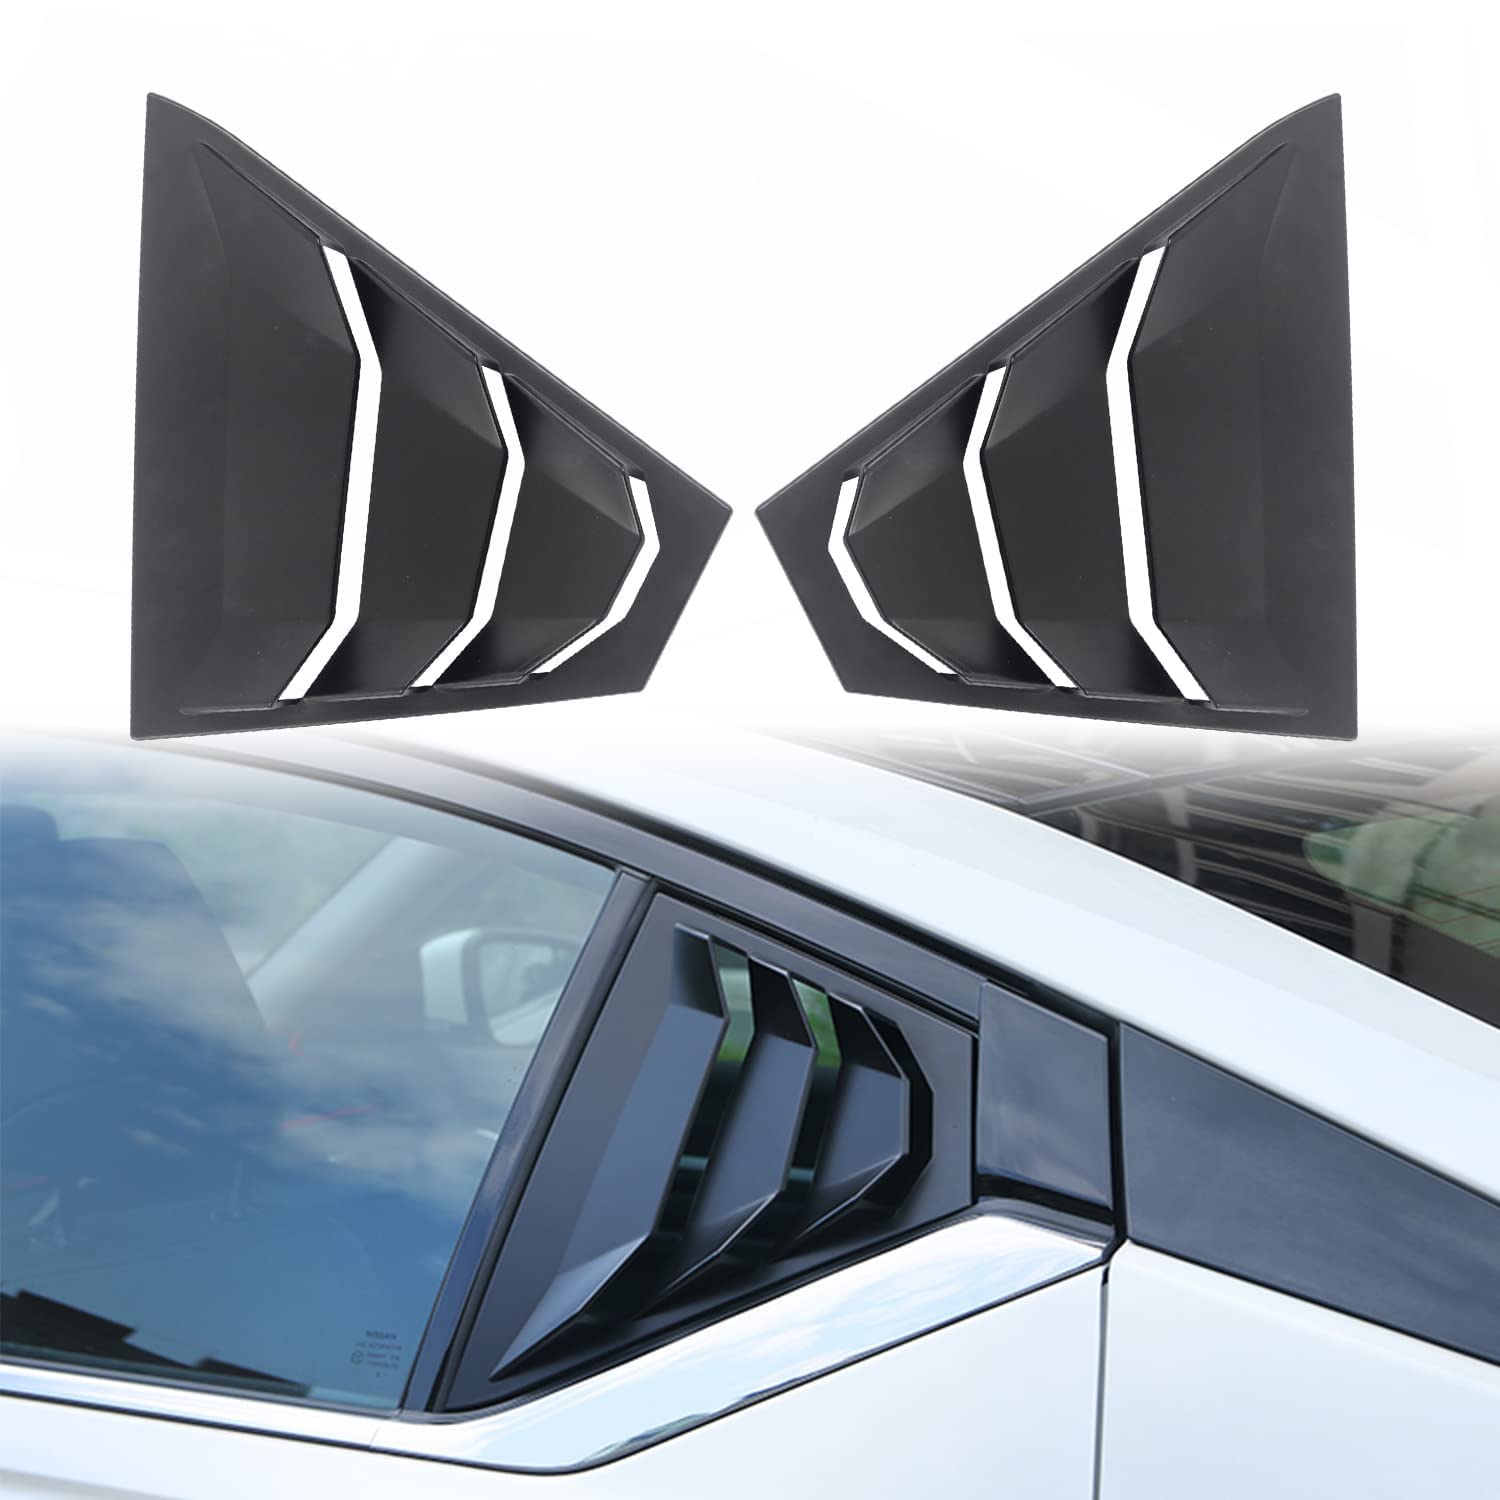 DXgTOZA Side Window Louvers for 2019-2022 Nissan Altima Racing Style Window Louvers Air Vent Louver Scoop Shades cover 2PcS ABS(